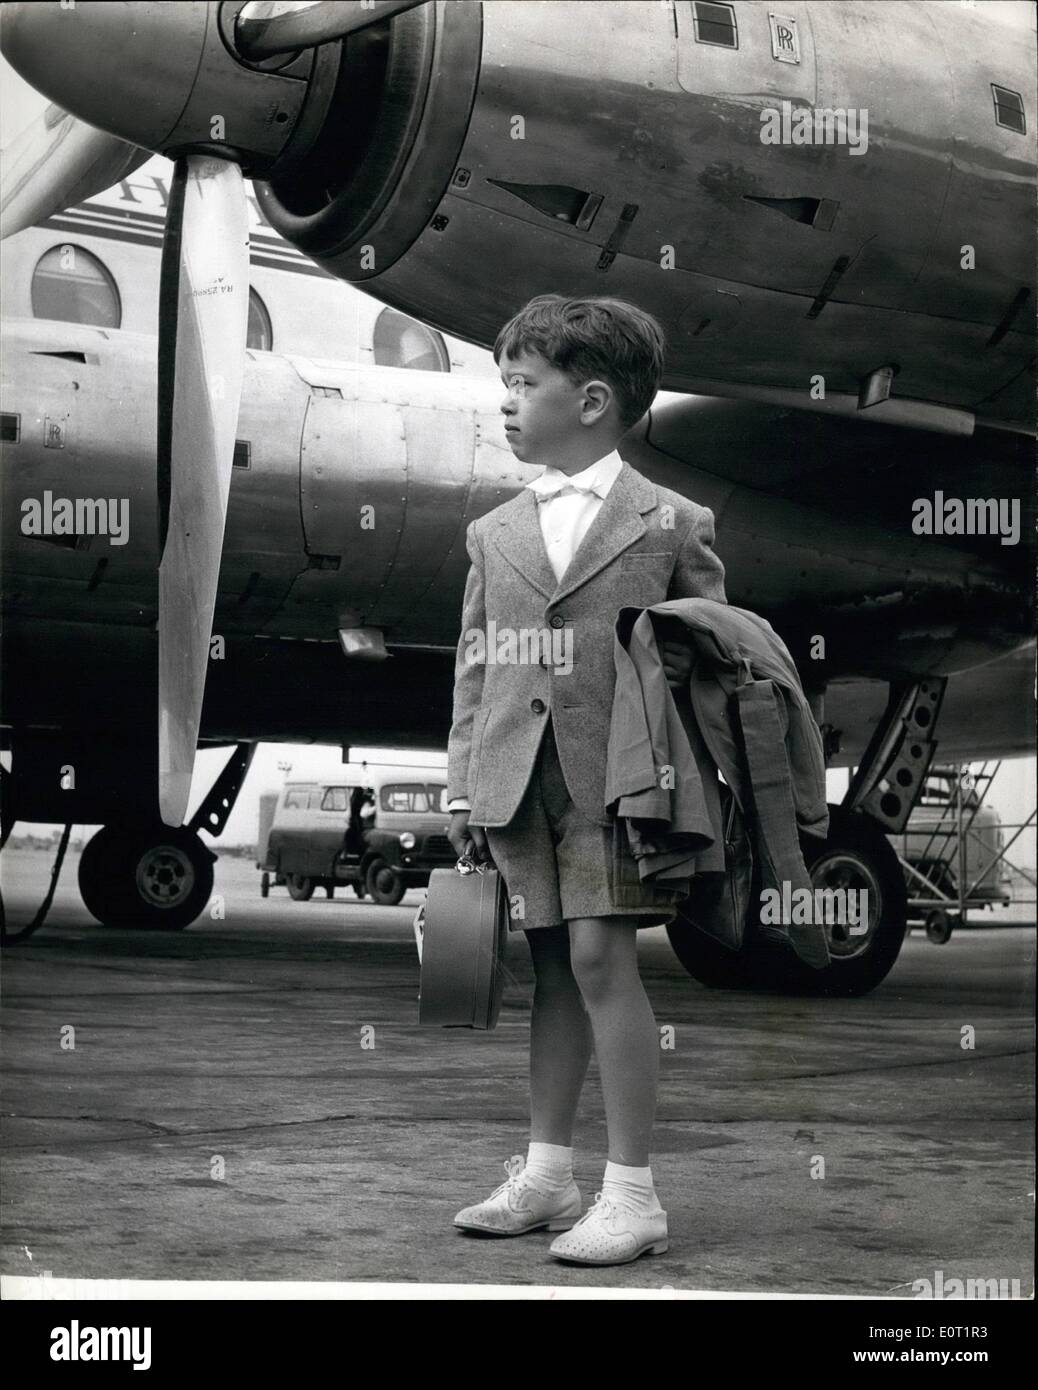 Jul. 07, 1960 - Members of Charlie Chaplin's family arrive in London: Four members of Charlie Chaplin's family arrived in London yesterday en route for Ireland for a holiday. Photo shows Eugene Chaplin who is called ''Tadpole'' by the family stands waiting for other members of his family beneath the engines of one of the aircraft at London Airport. Stock Photo